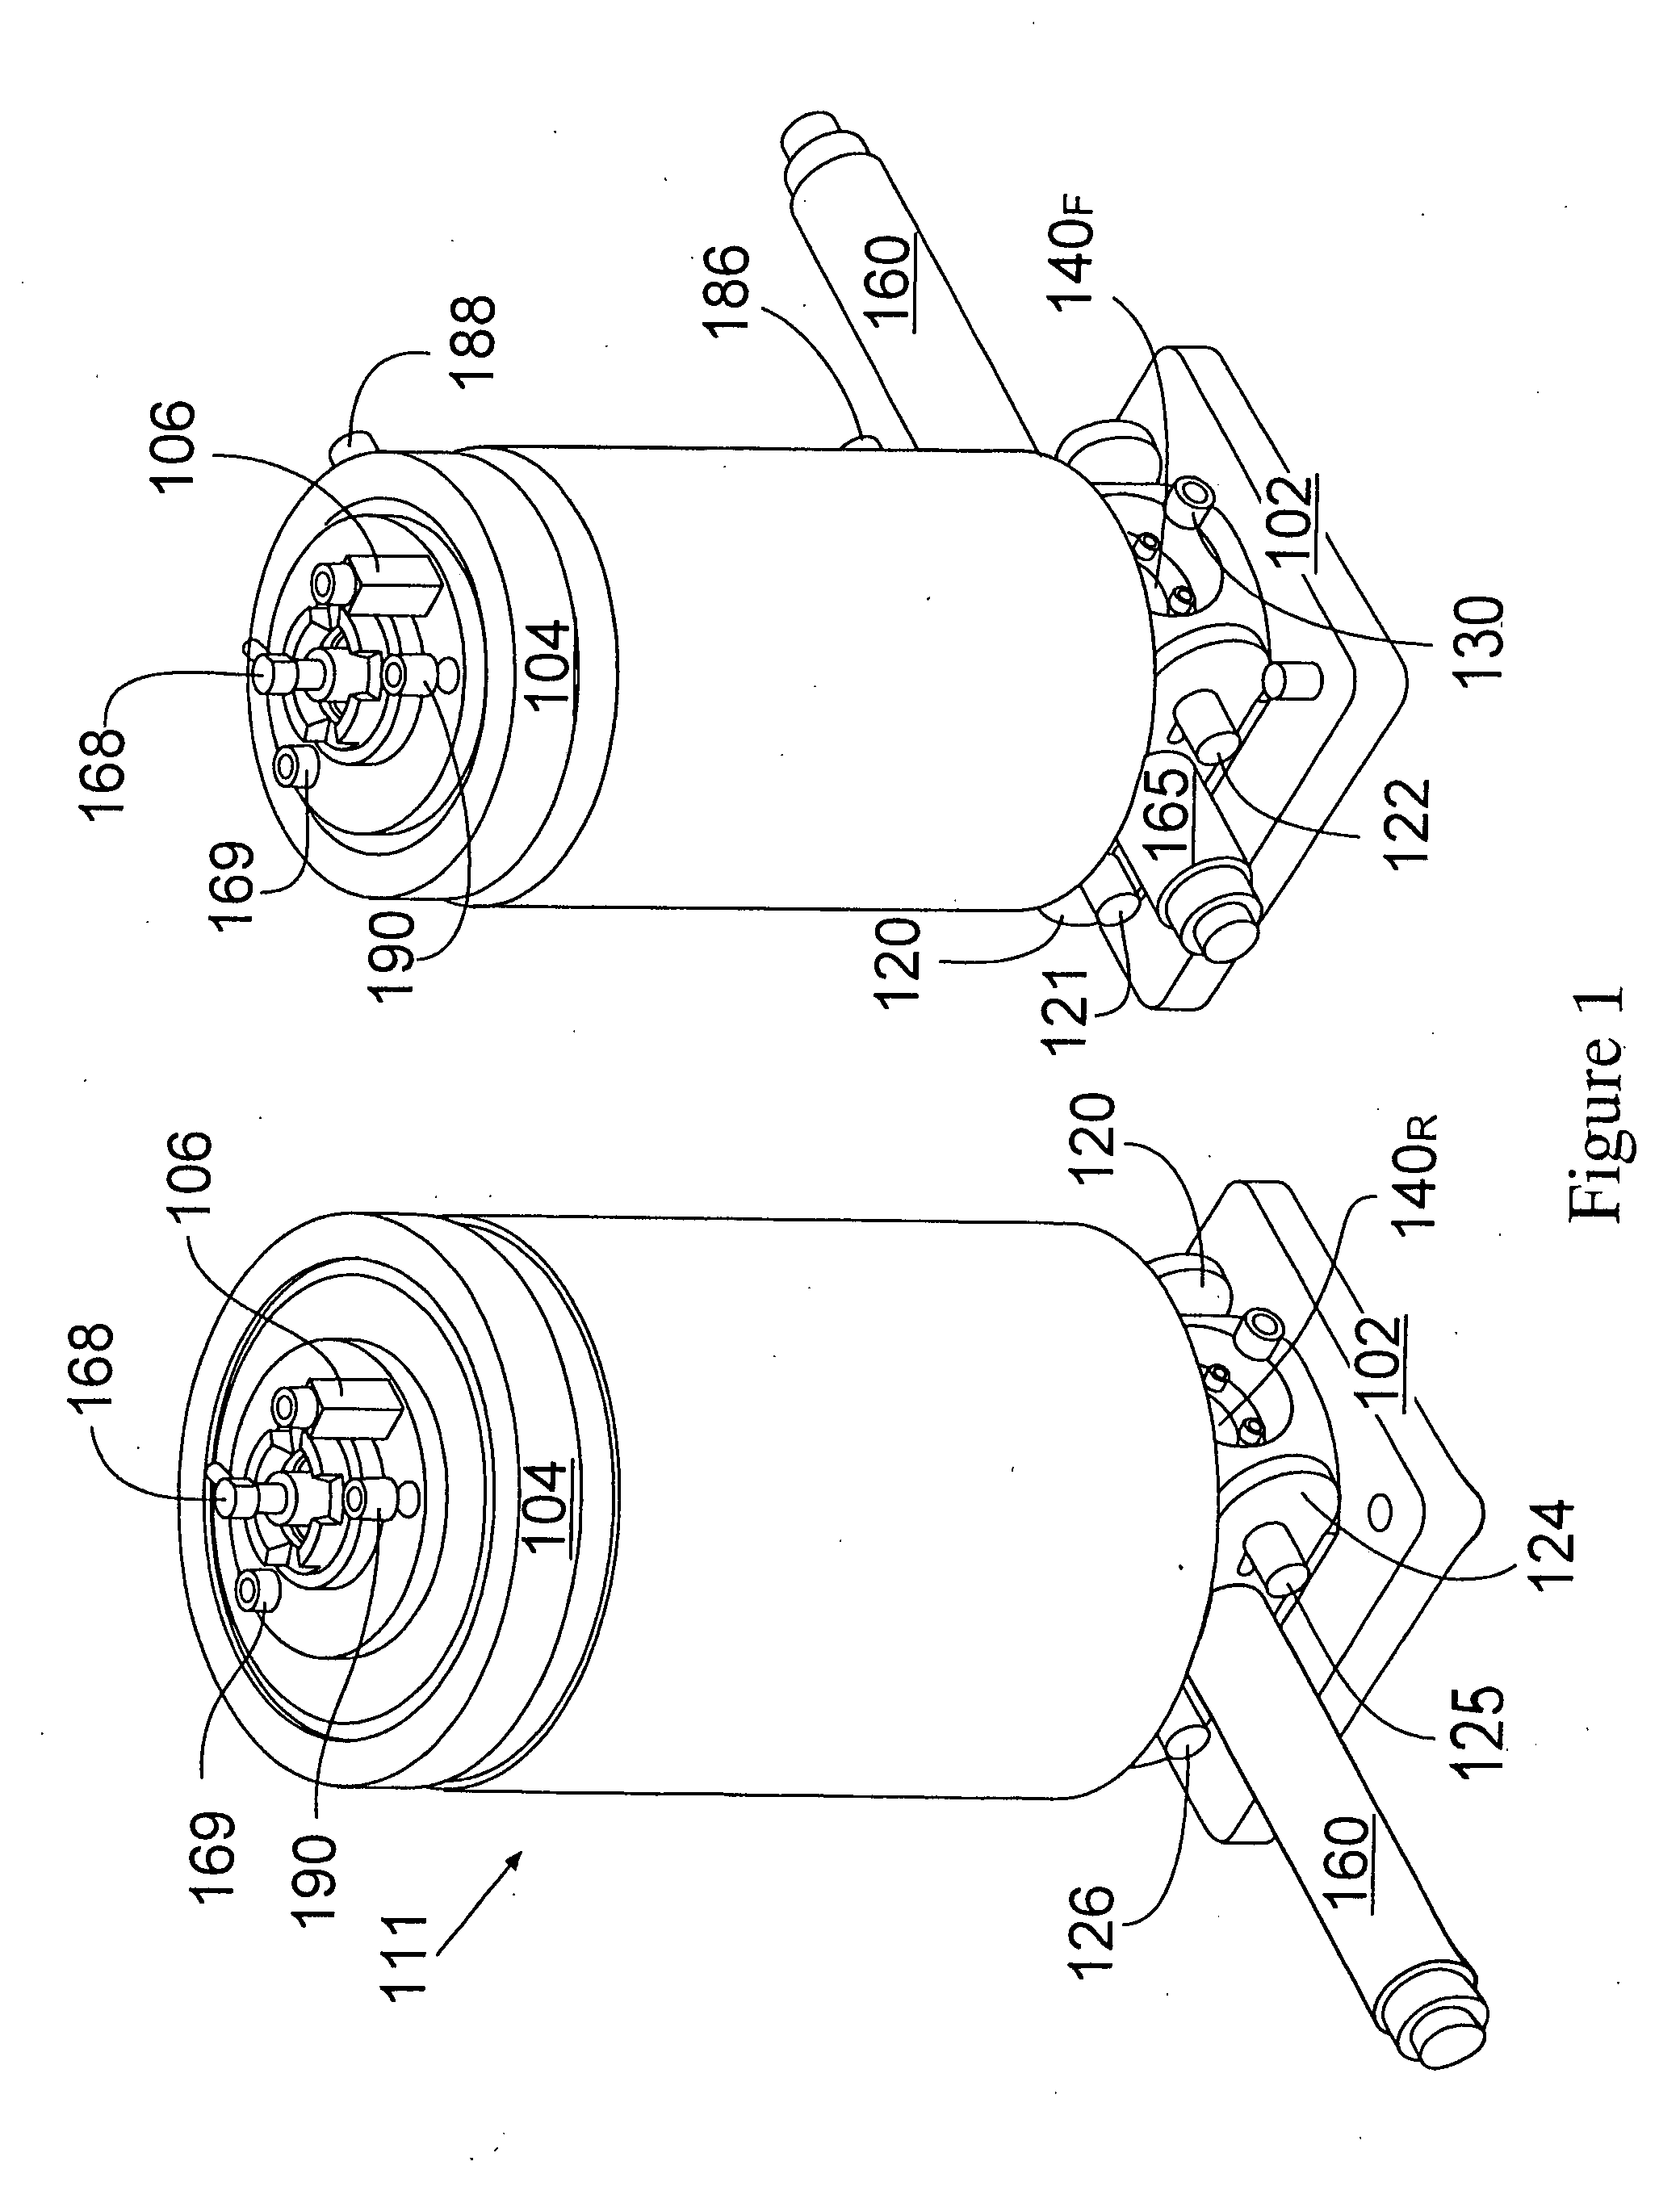 Automated low-volume tangential flow filtration process development device